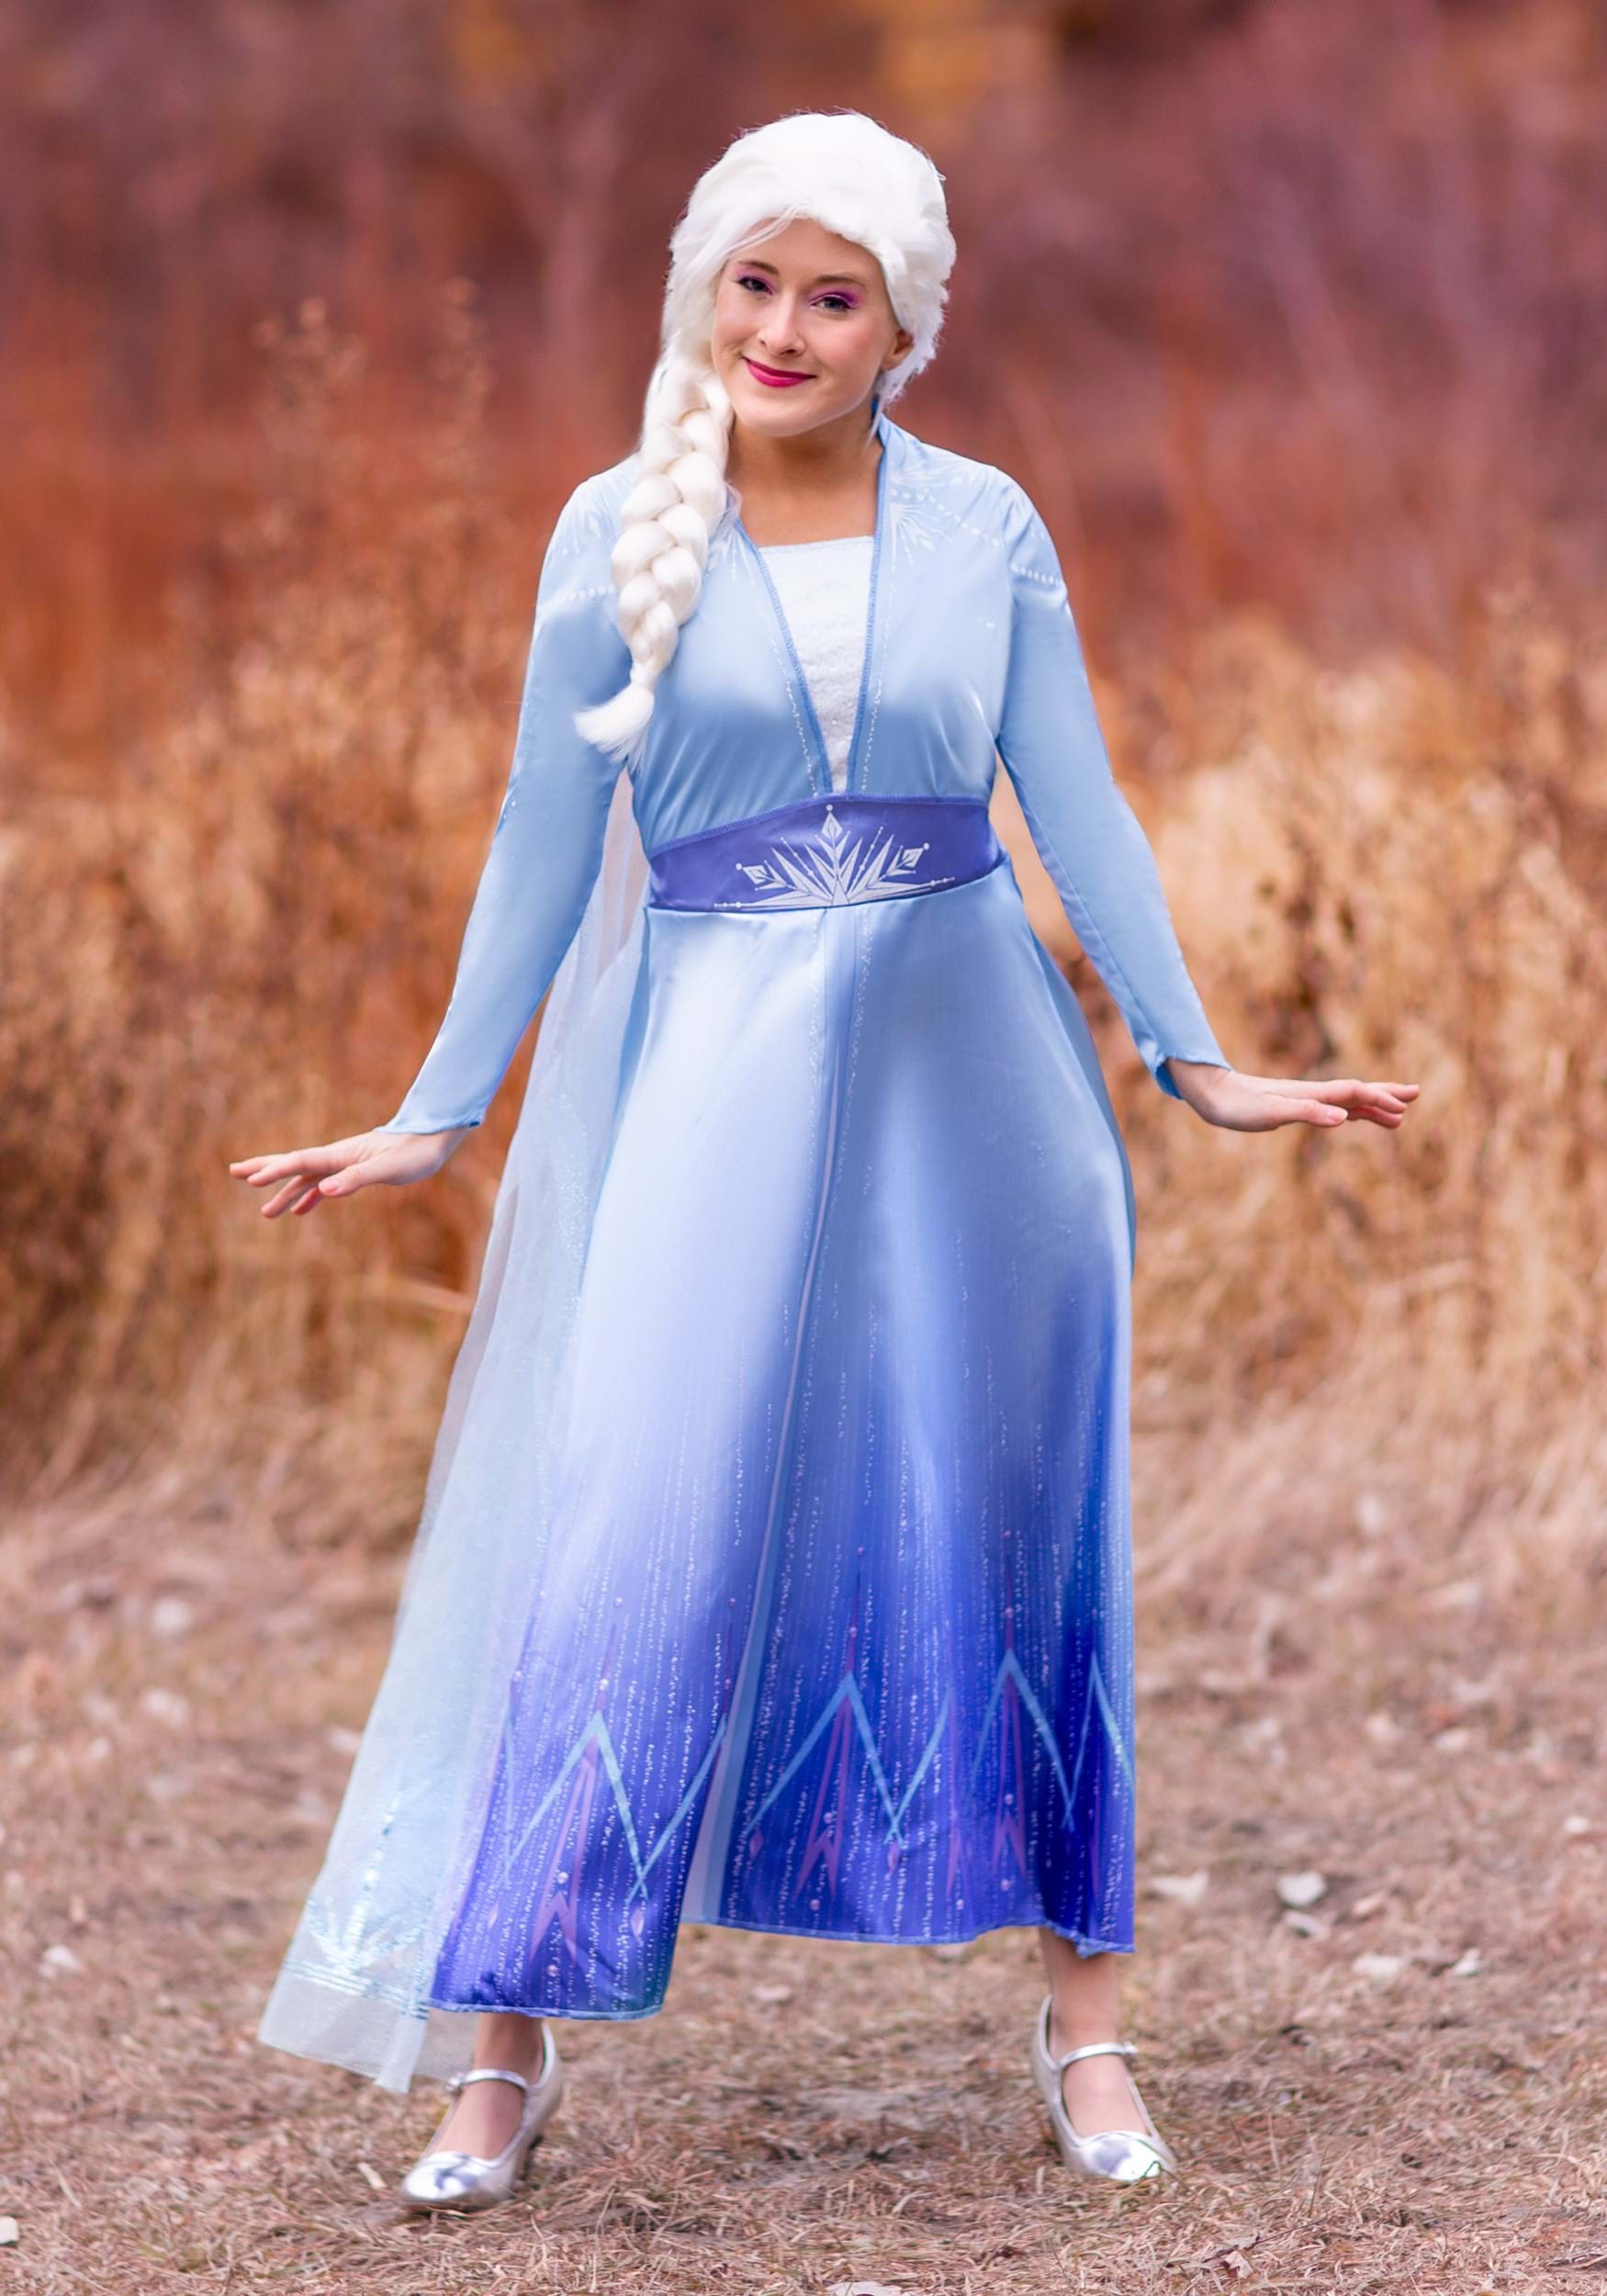 New Frozen 2 Costumes - Just Like Anna and Elsa Wear at Epcot - Available  for the First Time Outside the Park! - AllEars.Net